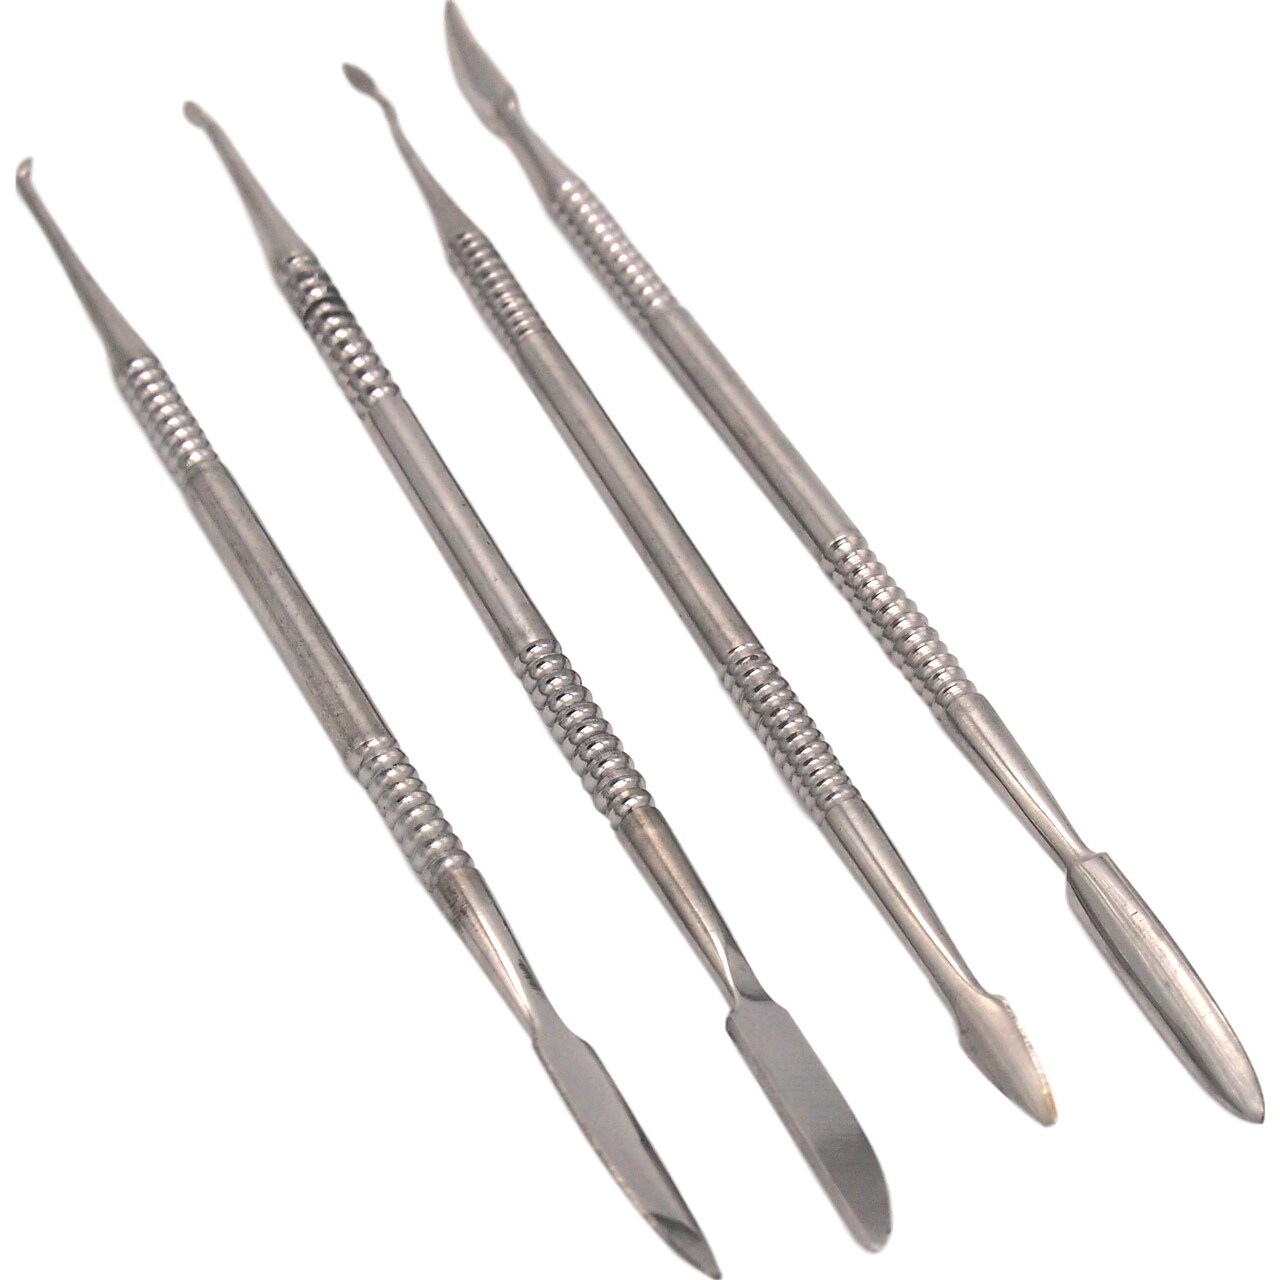 SE - Wax Carver Set - Sizes 6.25in. - 6.75in., 4 Pc, Hardware Use - DD315